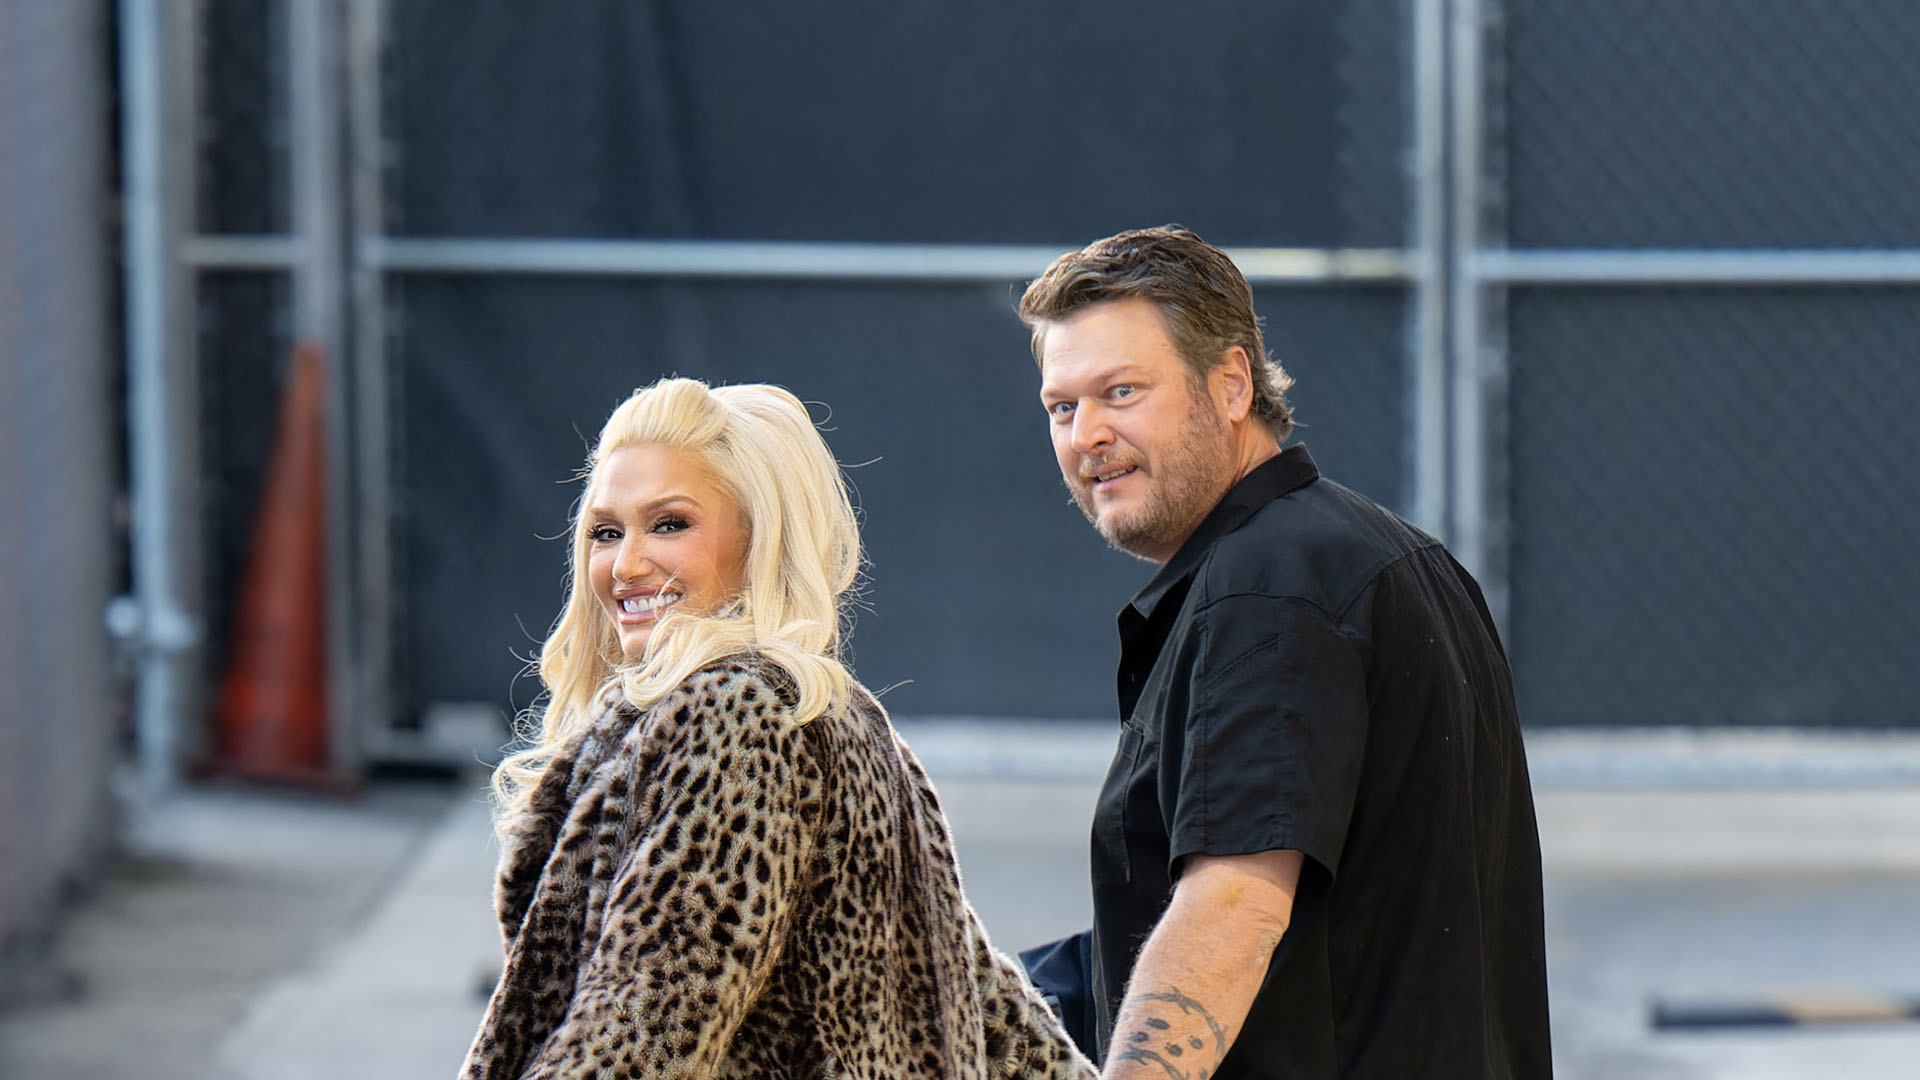 Gwen Stefani holds Blake Shelton’s hand in blink-and-you’ll-miss it moment after fans think couple has ‘marriage issues’